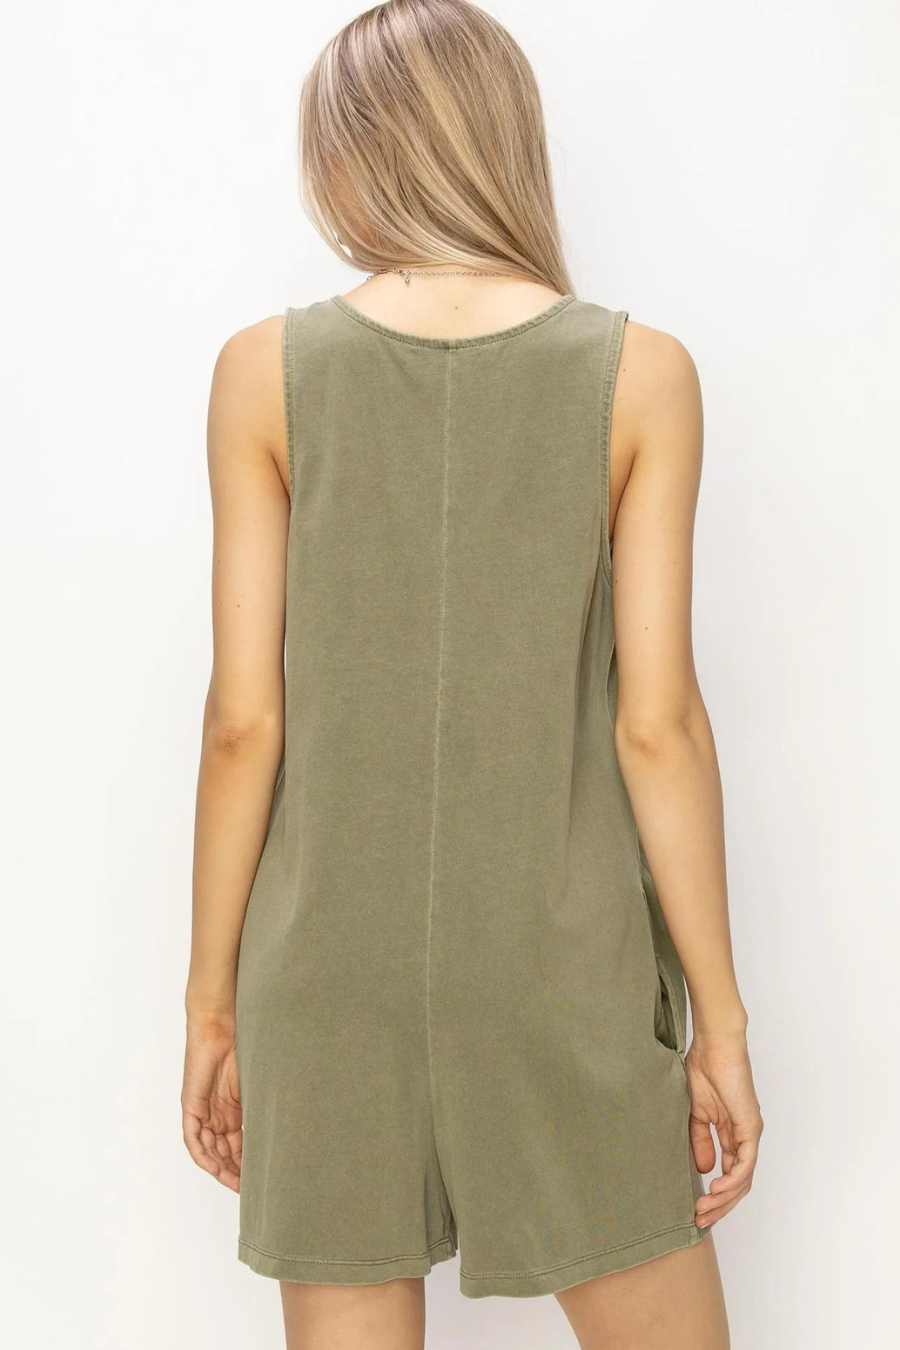 showing back view of olive romper 